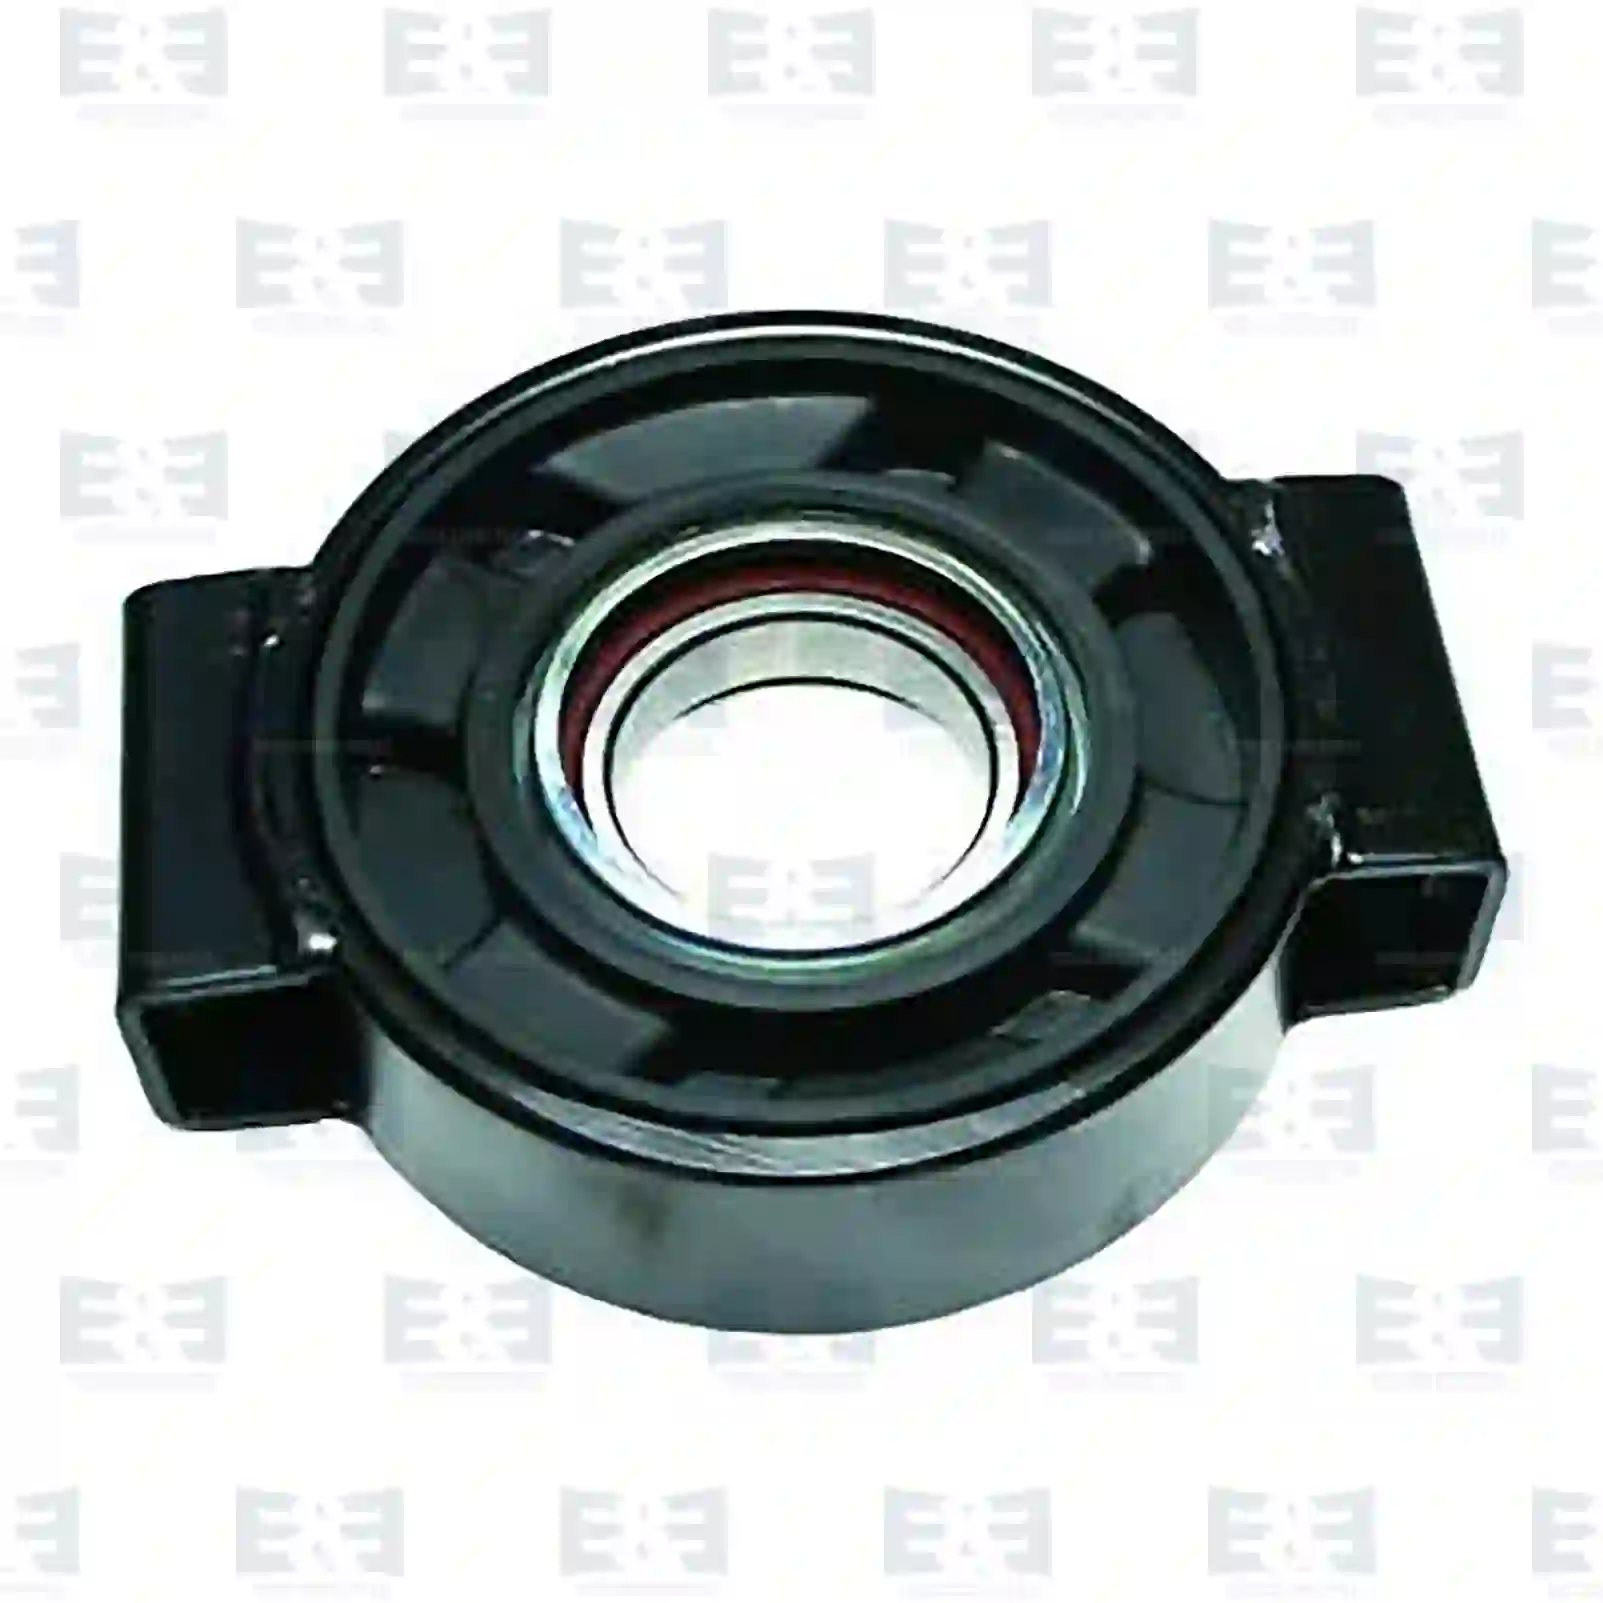 Support Bearing Center bearing, EE No 2E2276858 ,  oem no:4004100022, 3954100622, 6554100022 E&E Truck Spare Parts | Truck Spare Parts, Auotomotive Spare Parts